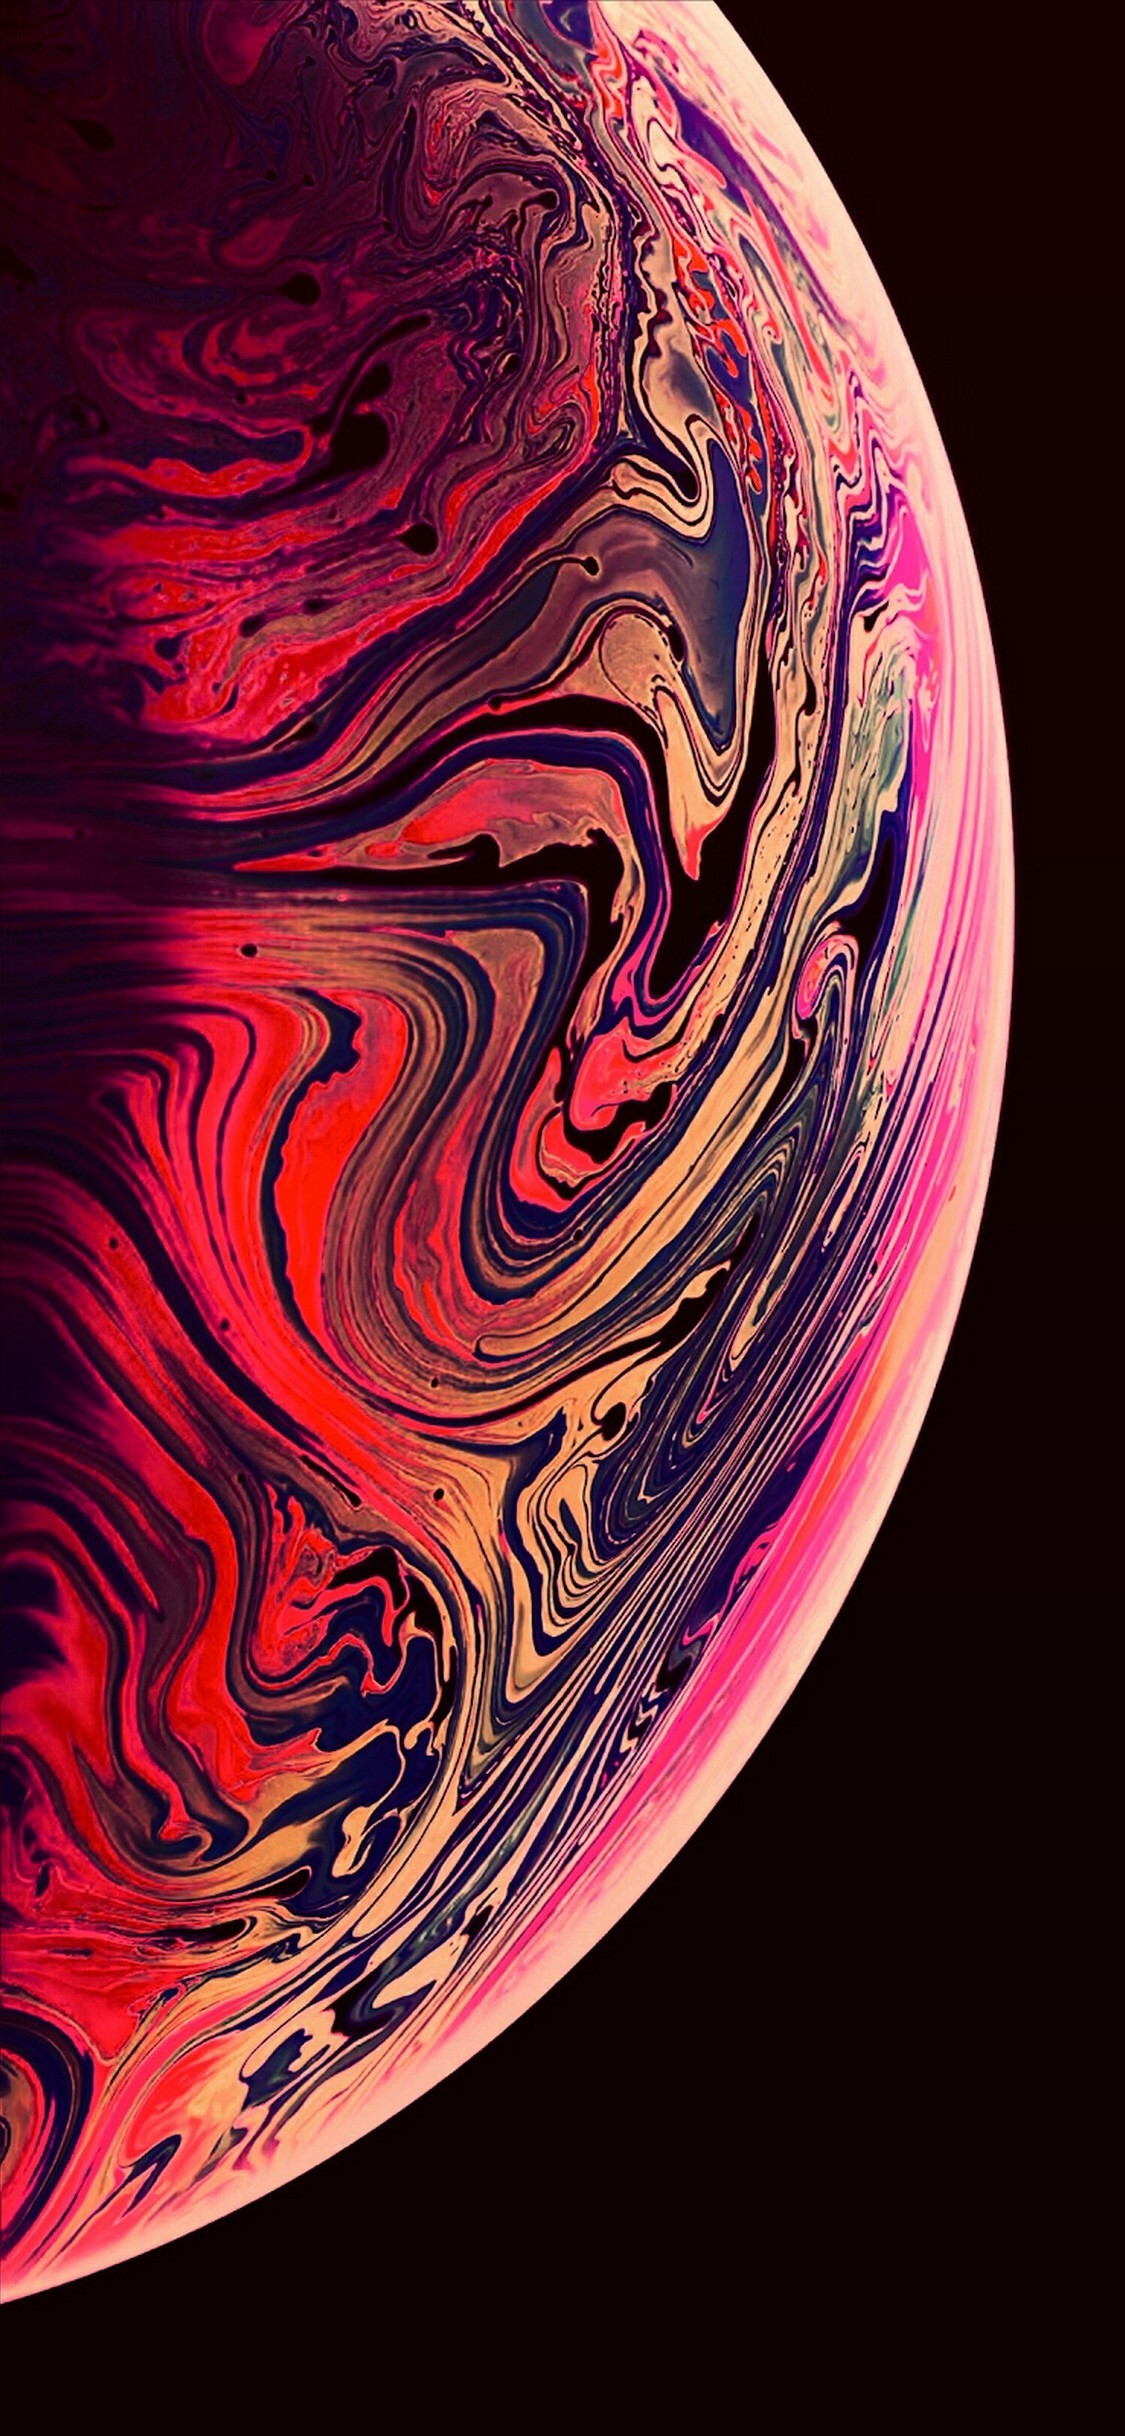 iPhone XS Screensaver With high-resolution 1125X2436 pixel. Download all Mobile Wallpapers and Use them as wallpapers for your iPhone, Tablet, iPad, Android and other mobile devices